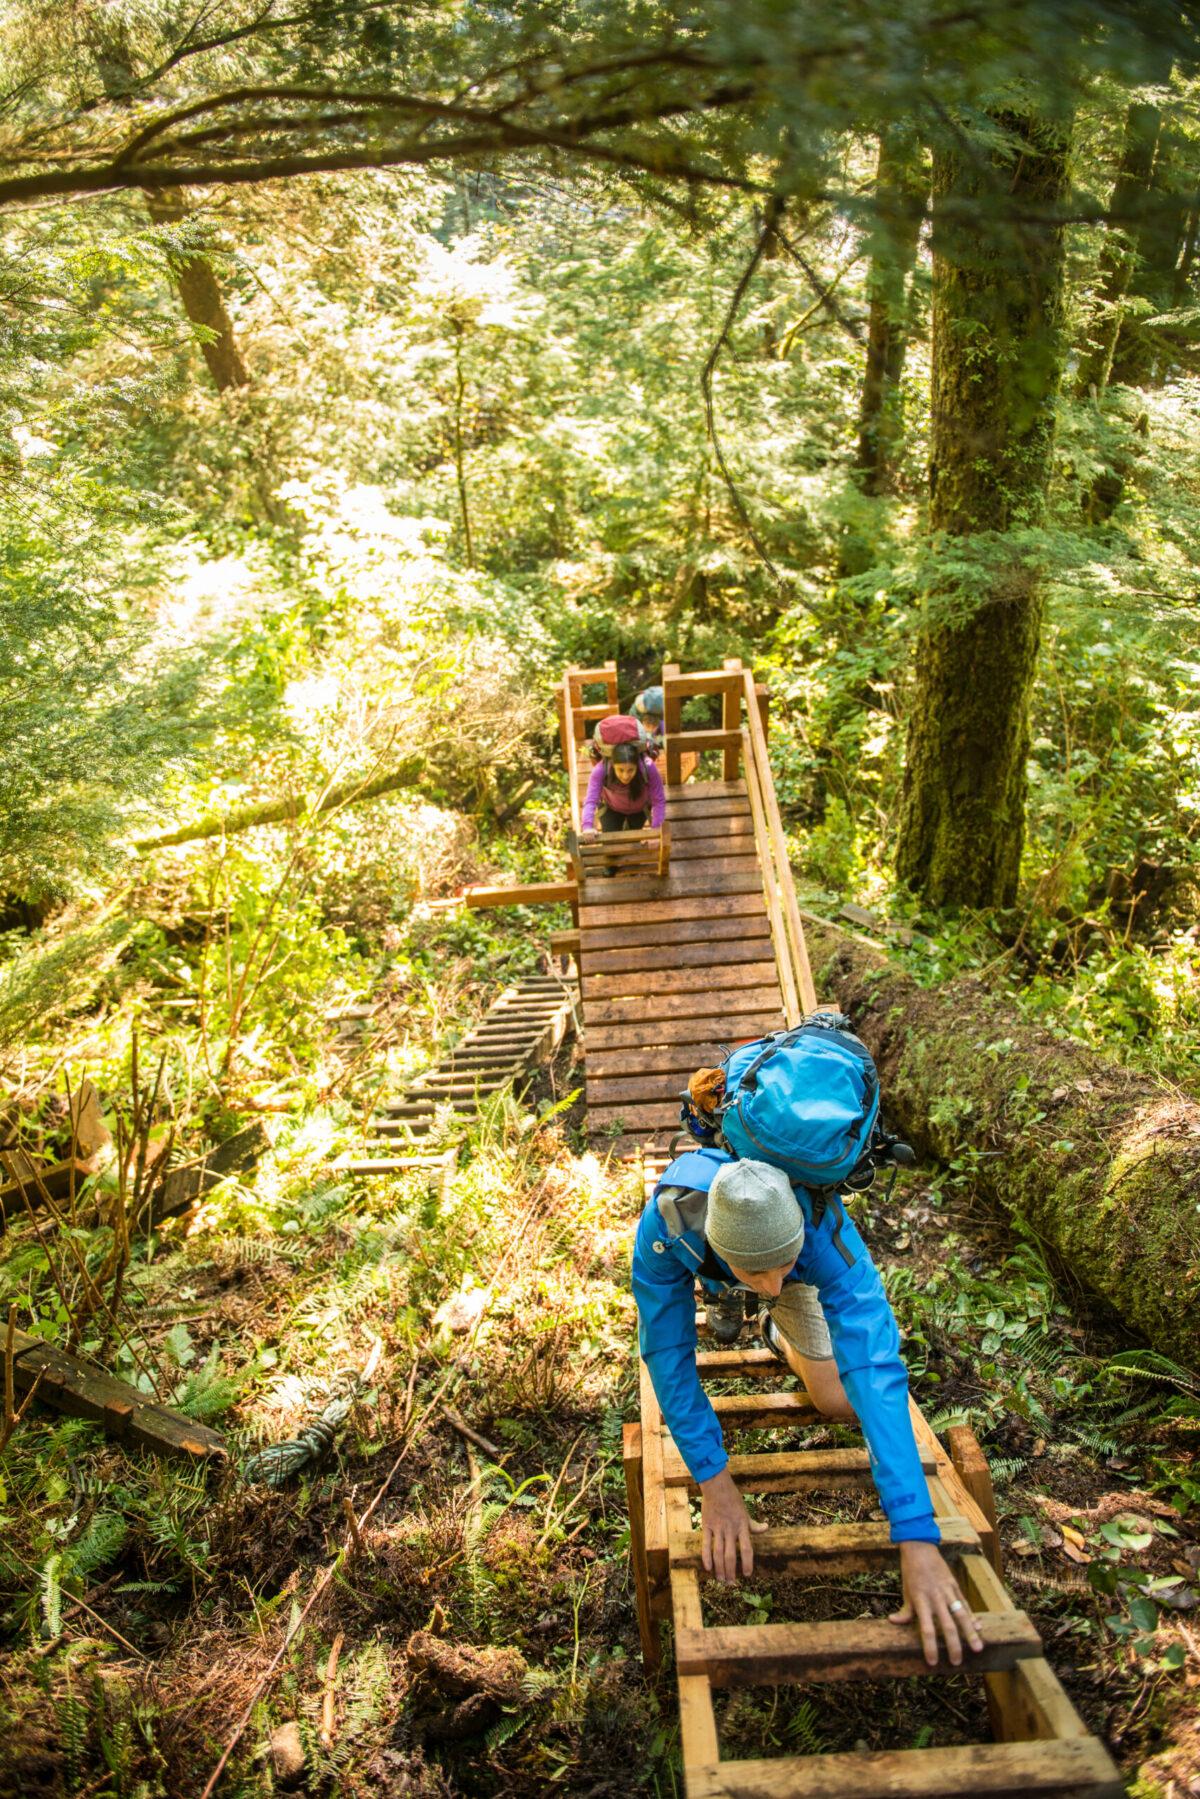 Multi-level ladders like this are just one of the many challenging hiking features found on the West Coast Trail. Pacific Rim National Park Reserve.). (Parks Canada / Scott Munn)